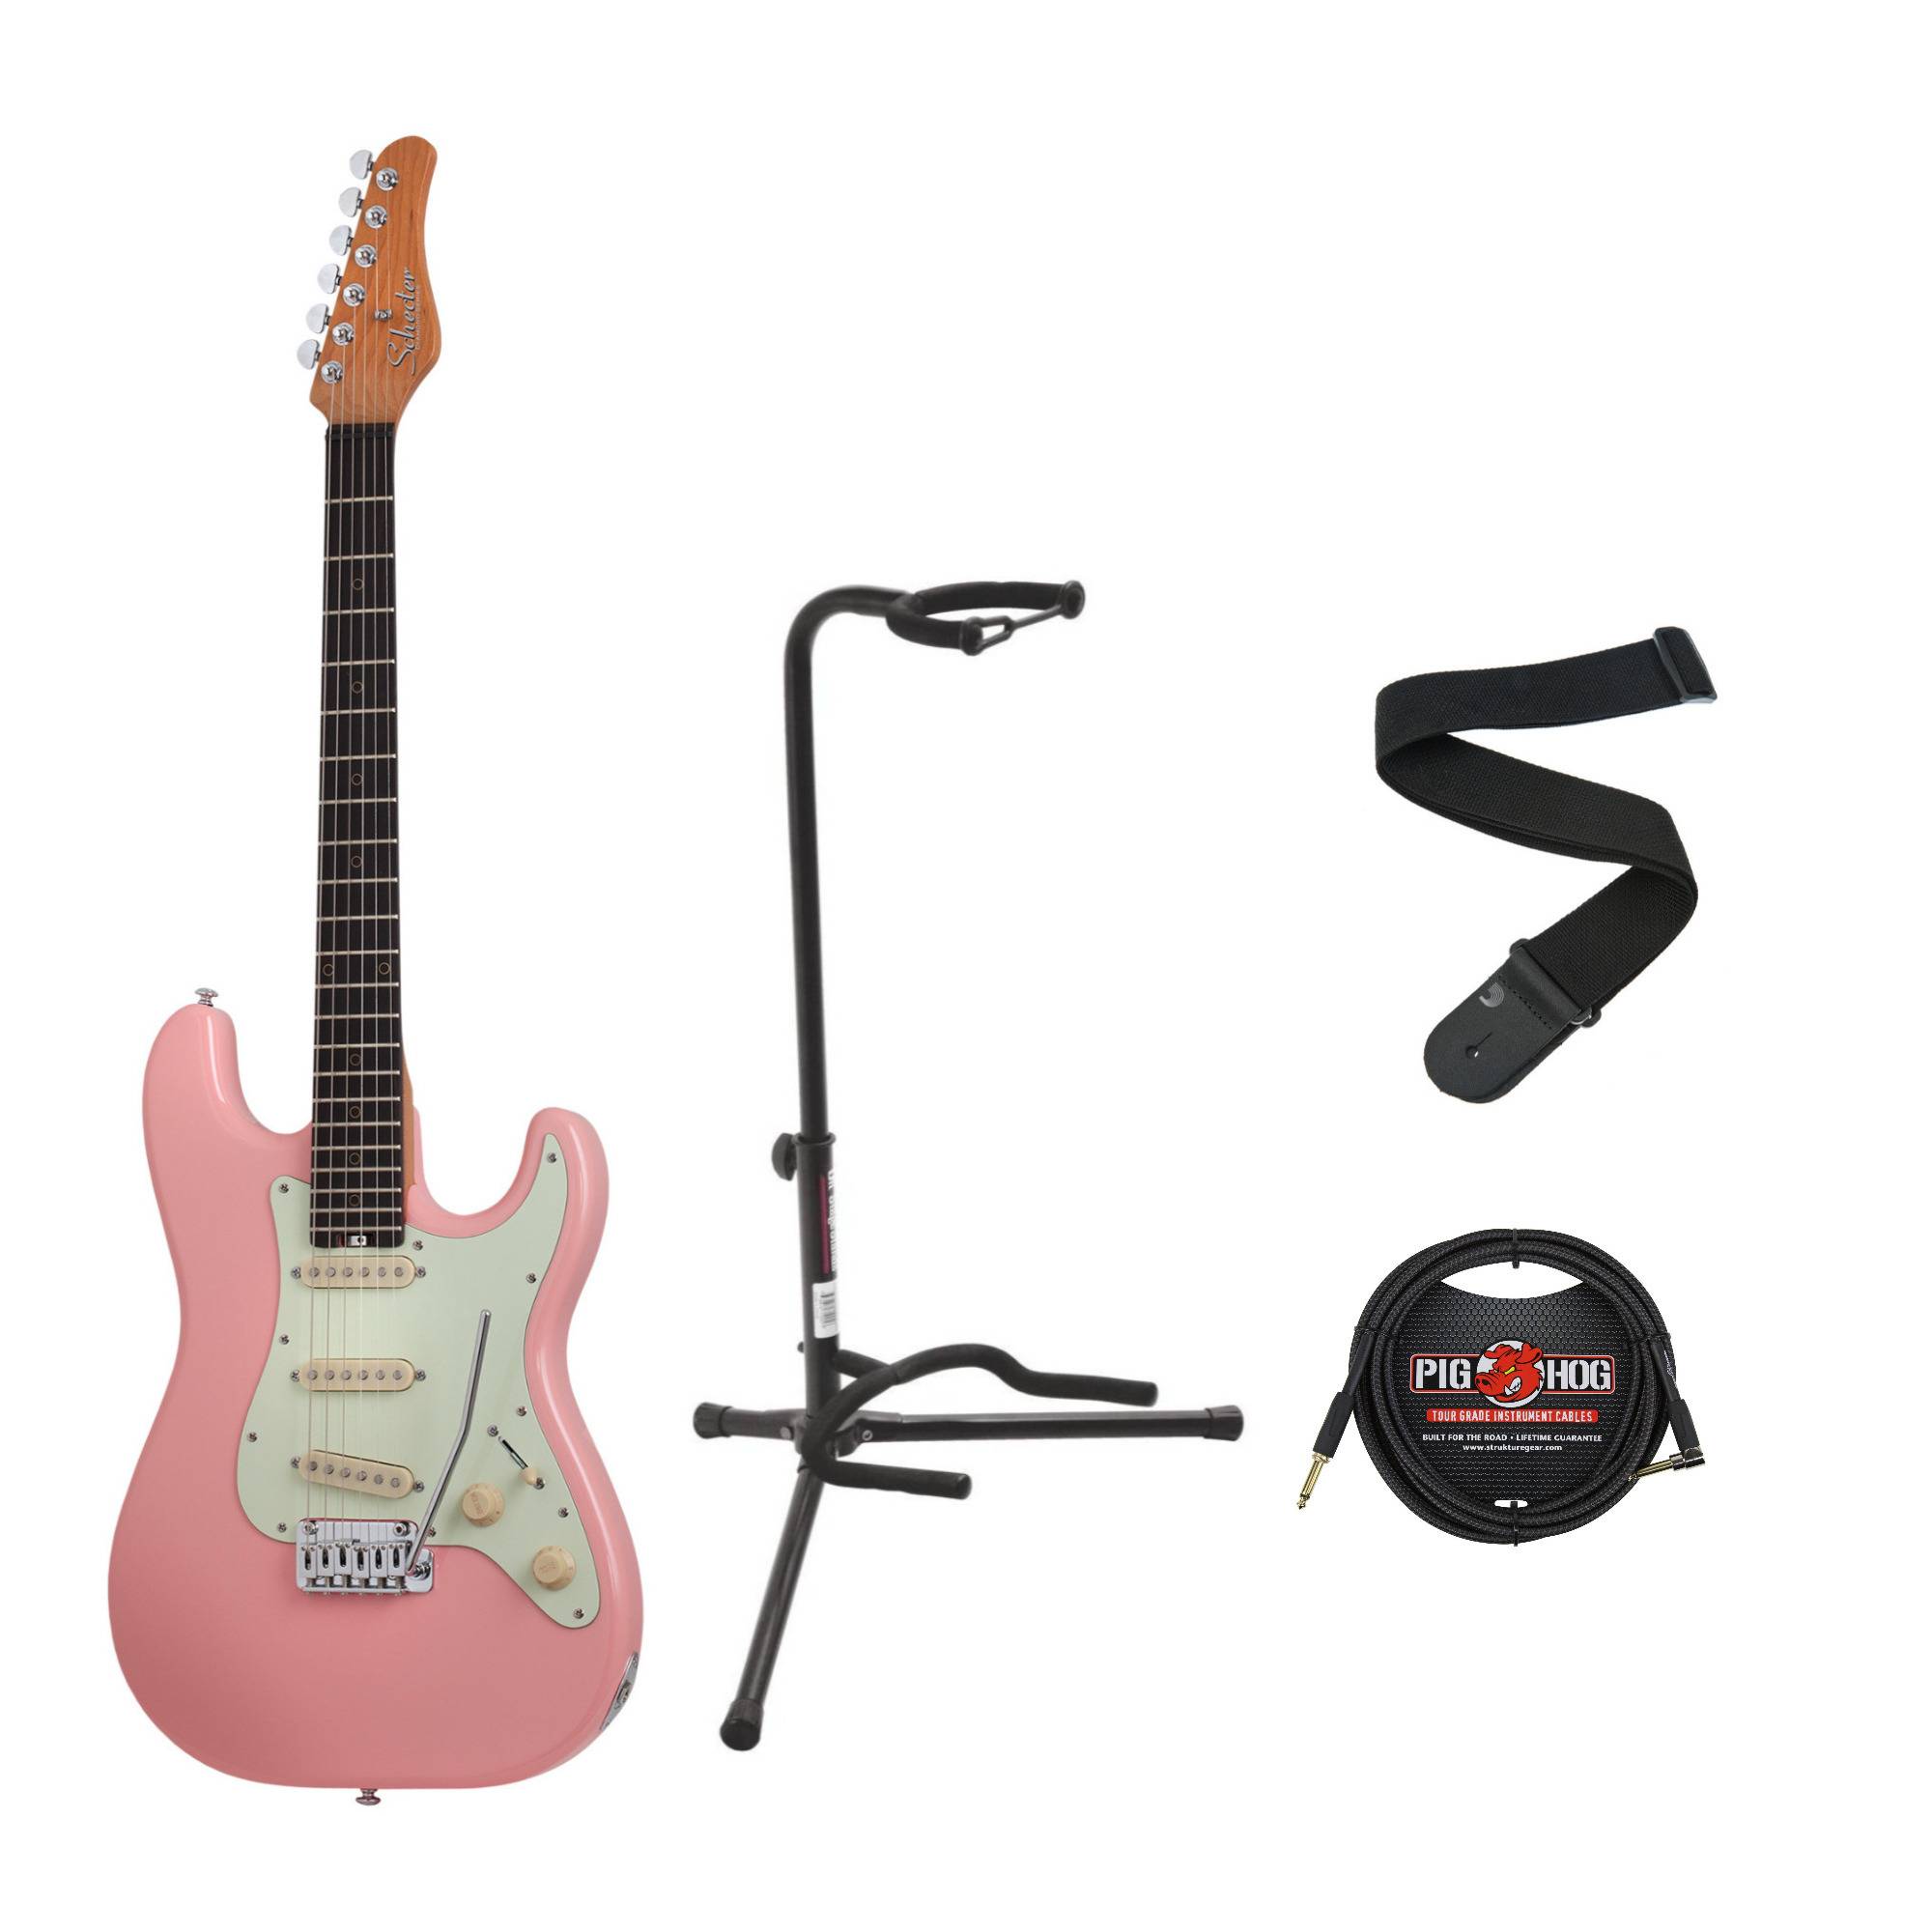 Schecter Nick Johnston Traditional Electric Guitar in Atomic Coral with Stand, Strap, and Cable